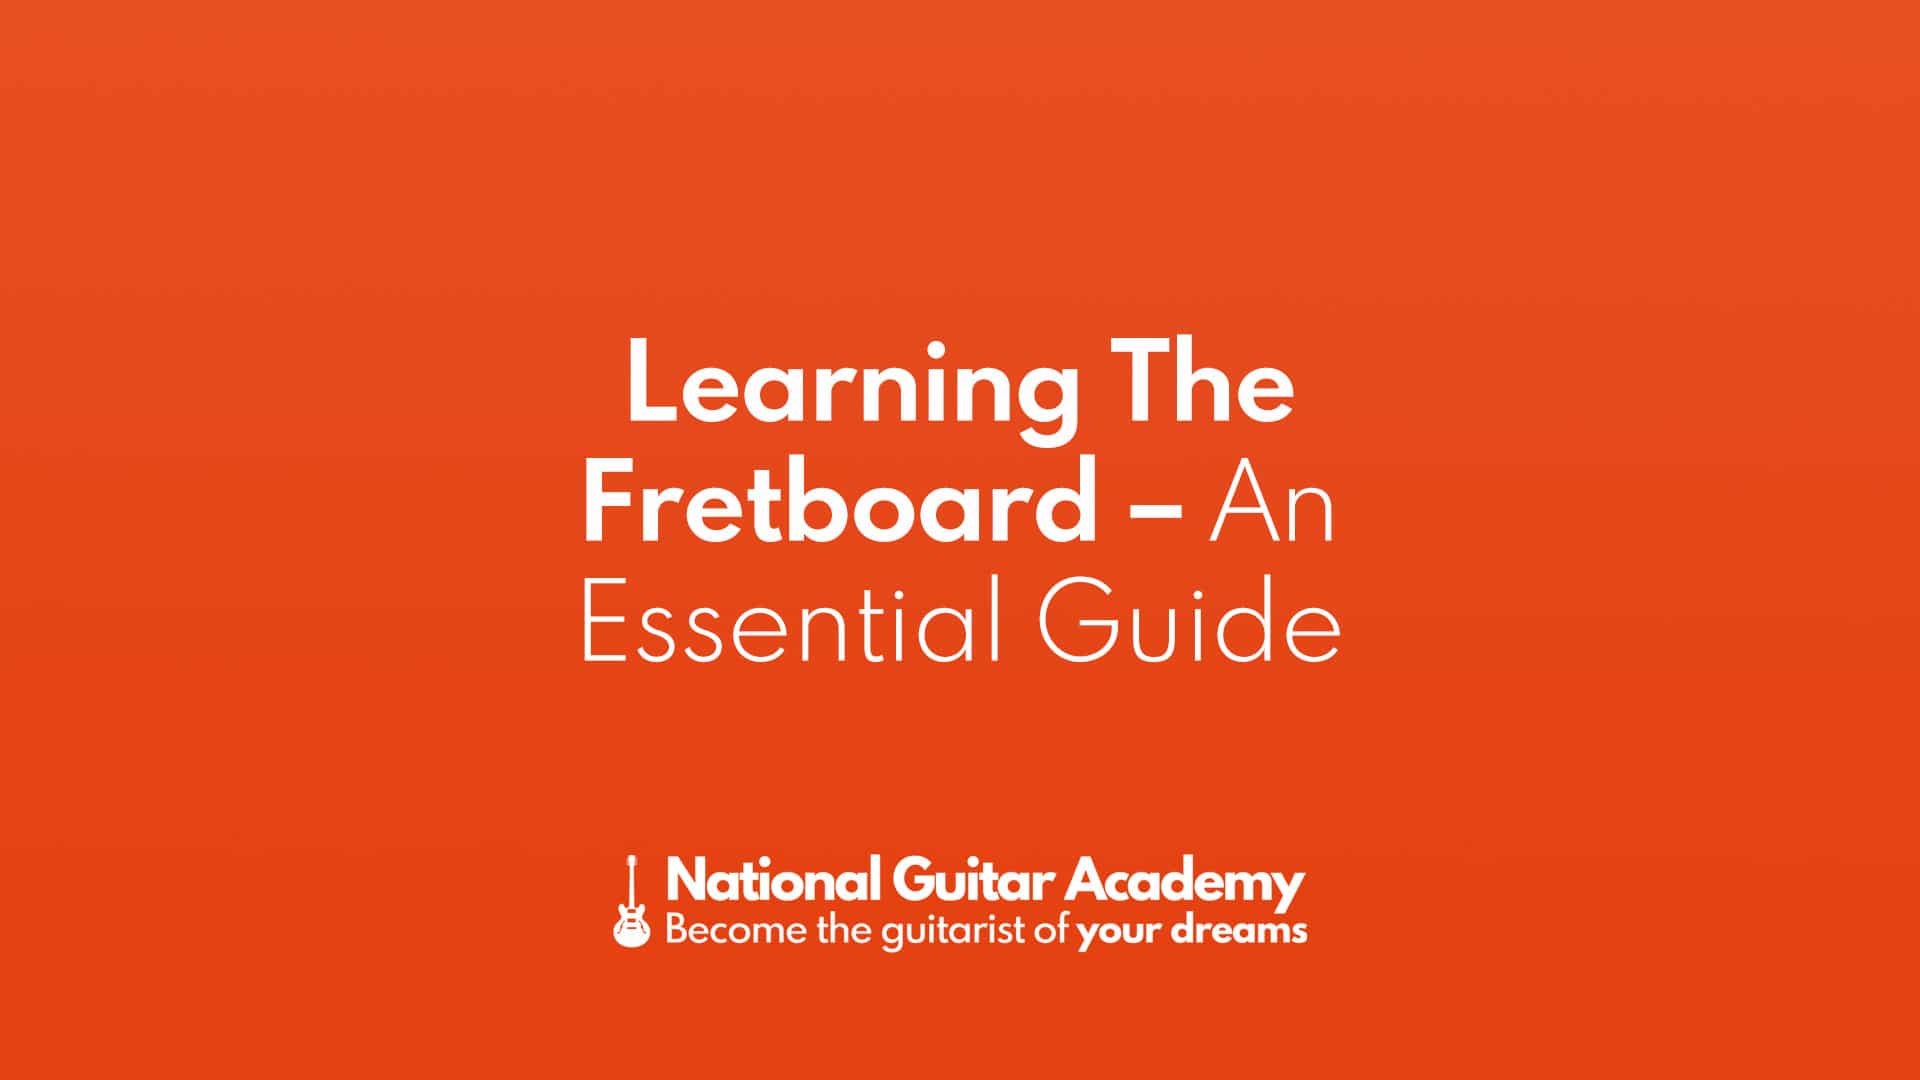 Learning The Fretboard - An Essential Guide - National Guitar Academy